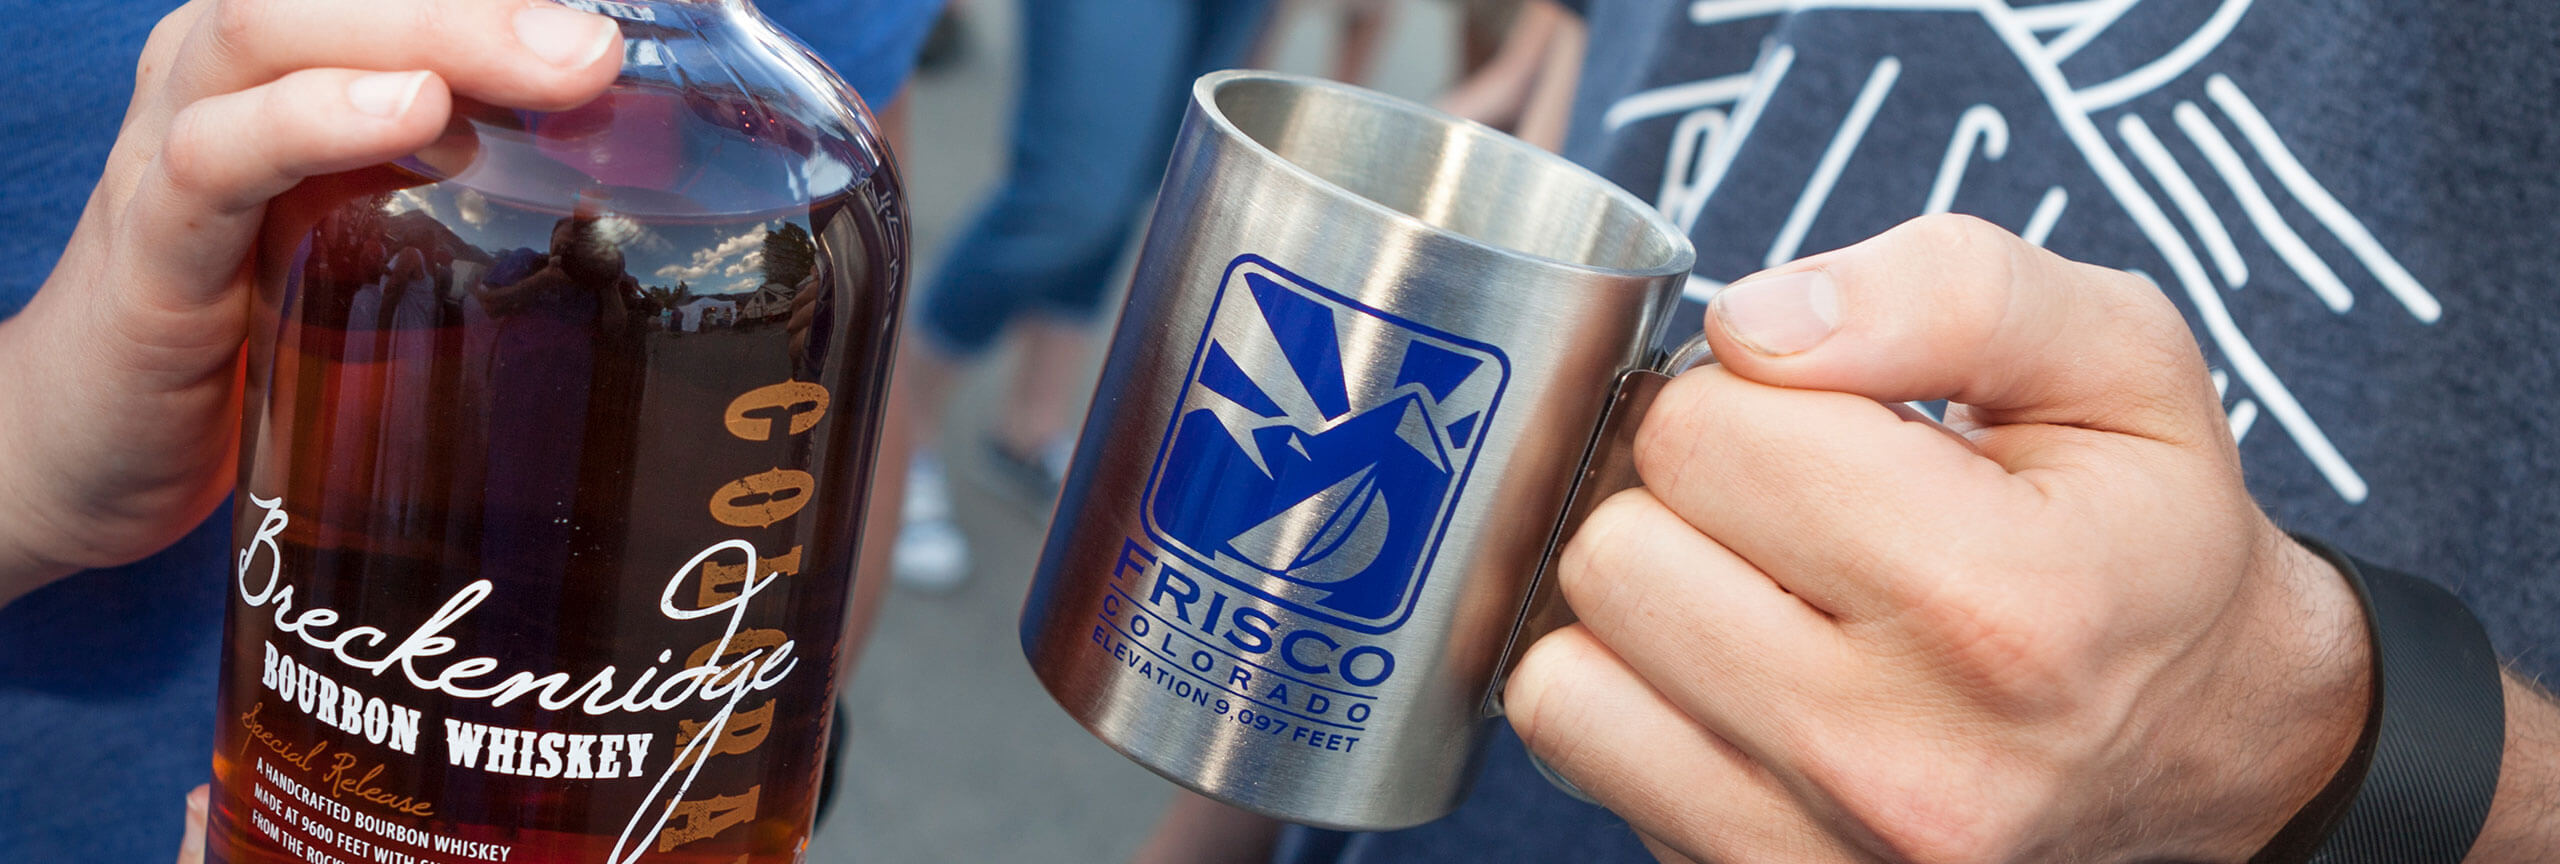 Close-up of stainless steel mug with Frisco logo and a bottle of whiskey from the Breckenridge Distillery.